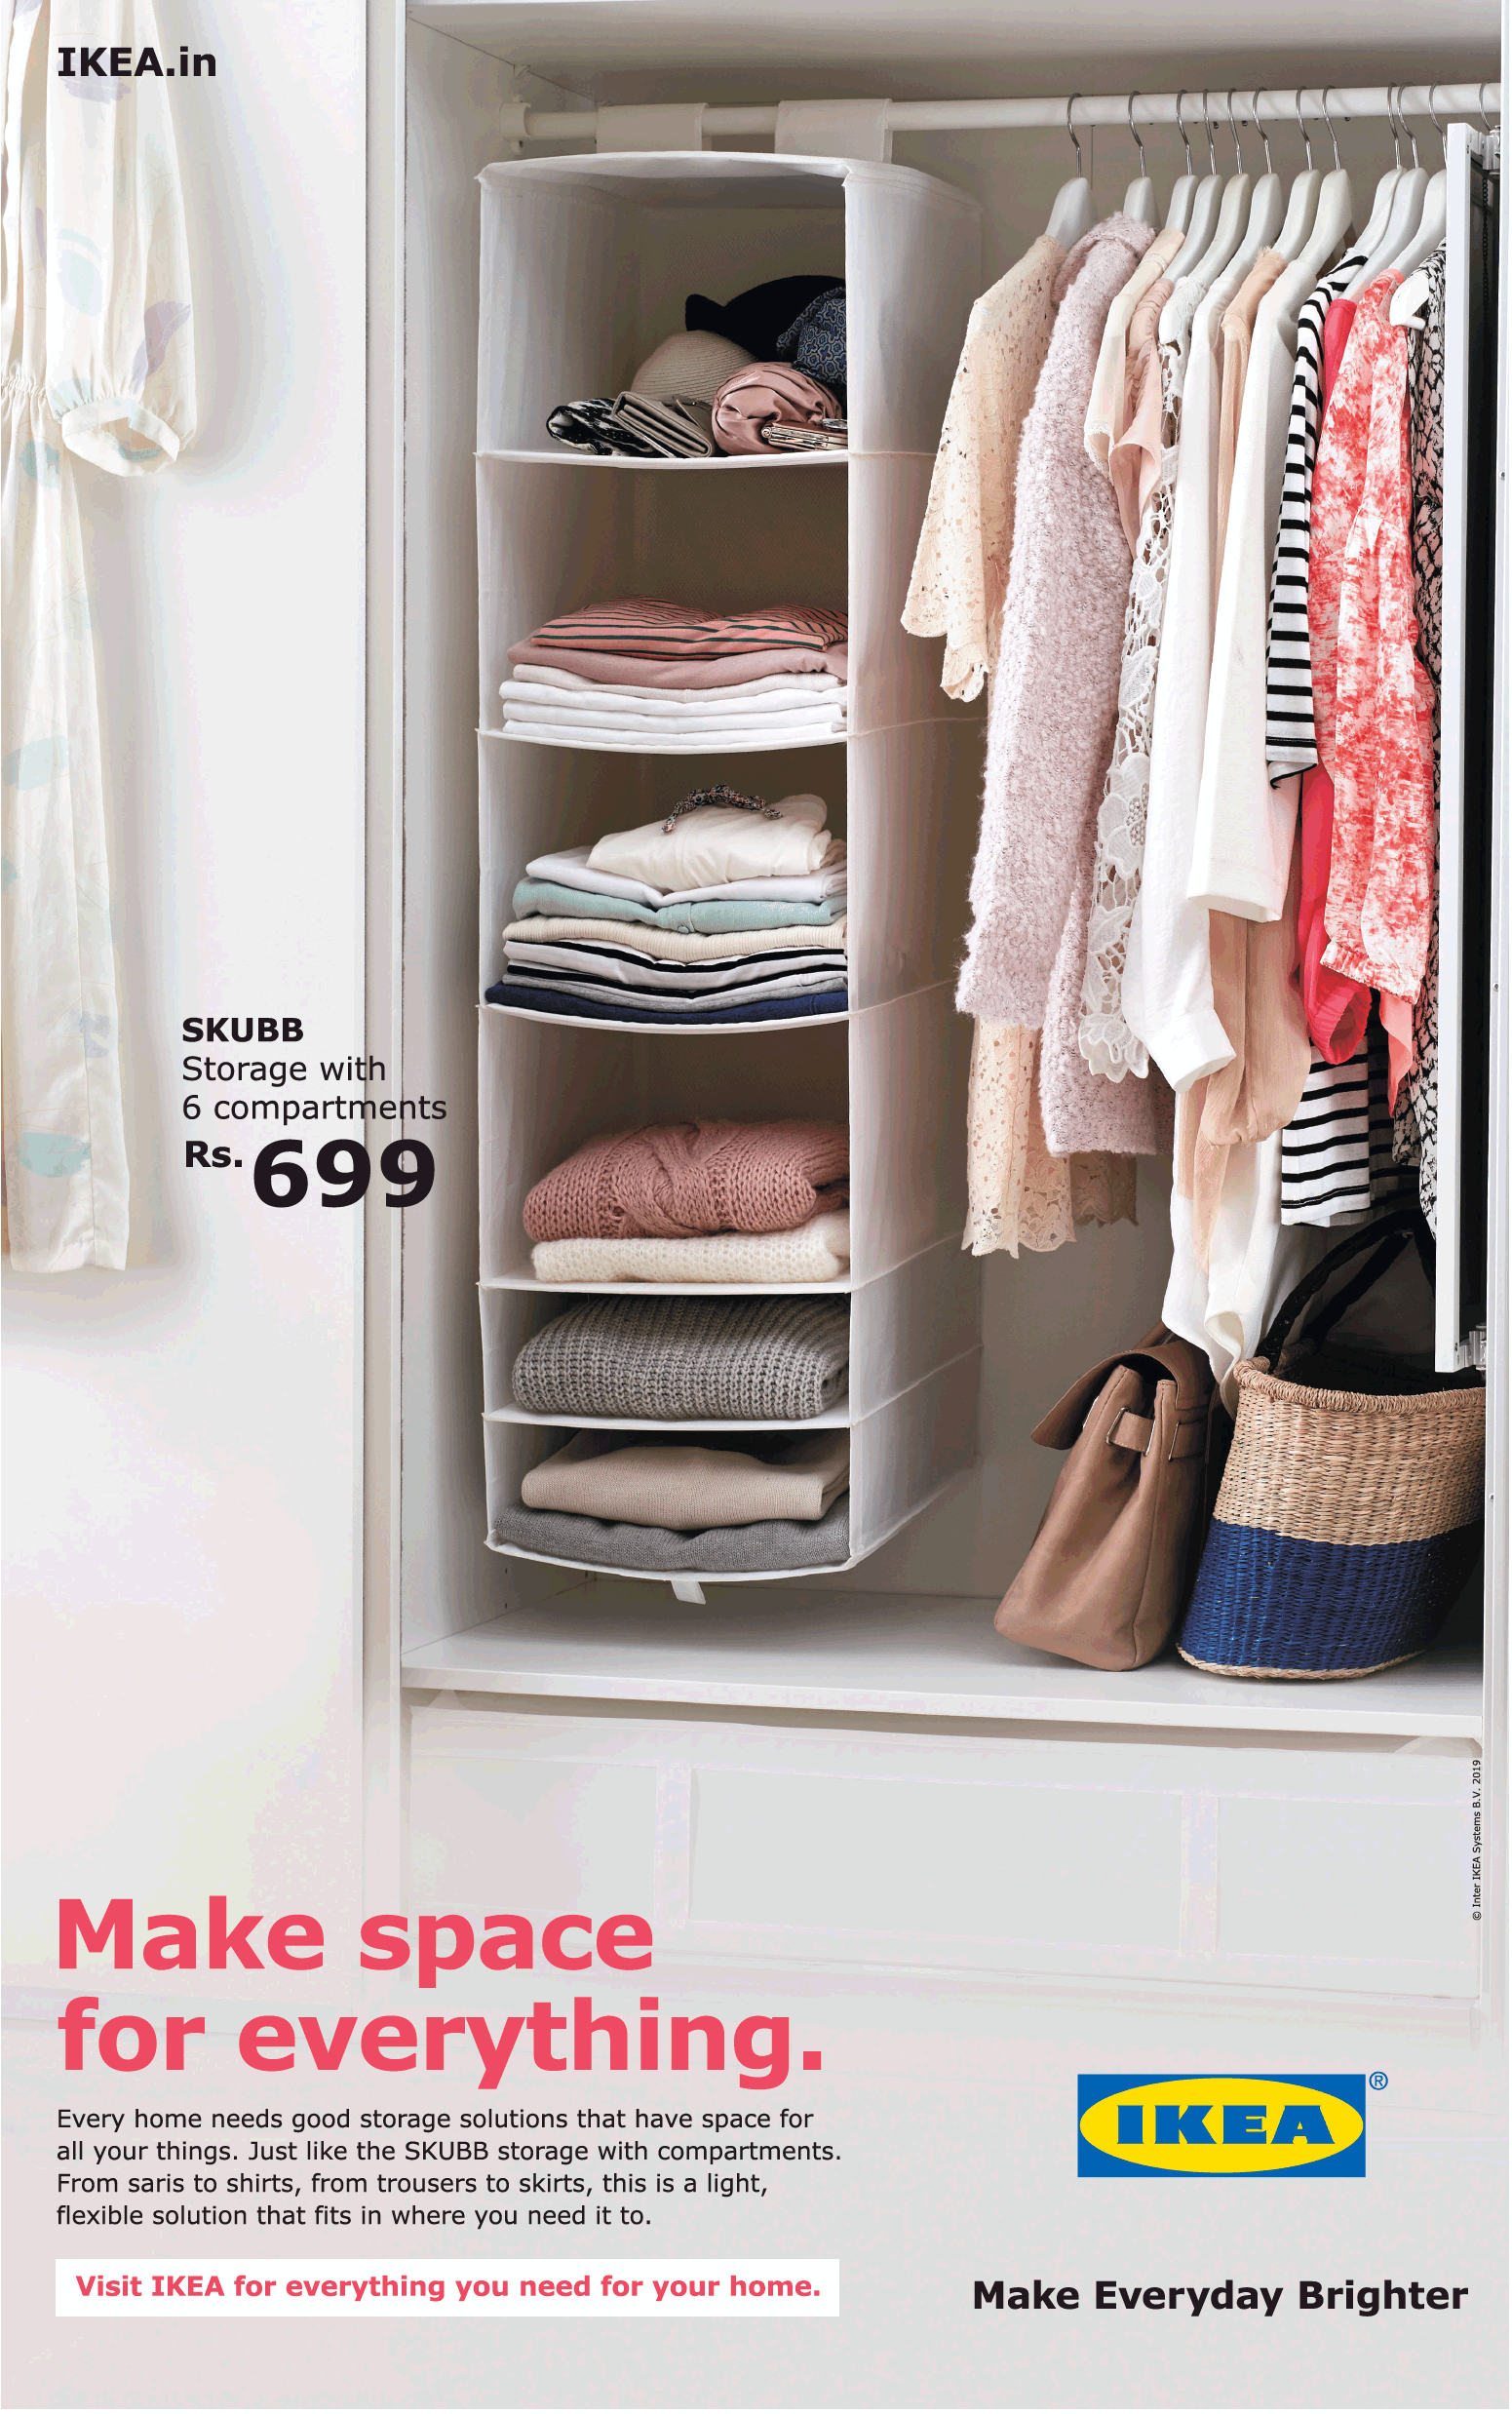 ikea-make-space-for-everything-ad-times-of-india-hyderabad-05-04-2019.png